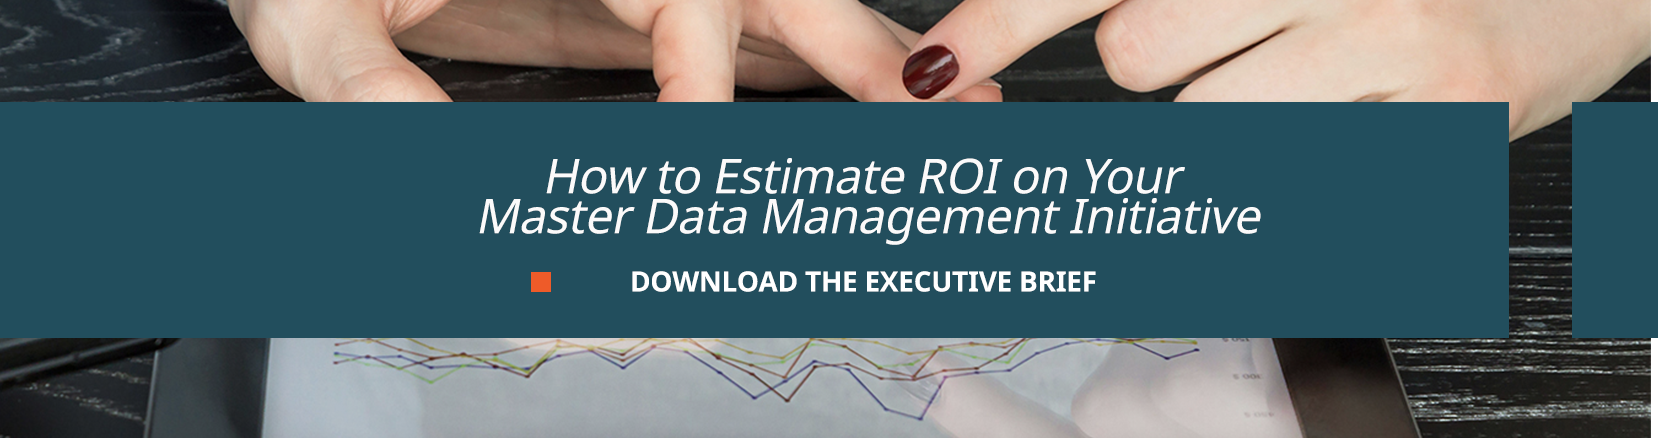 how to estimate roi on your master data management initiative